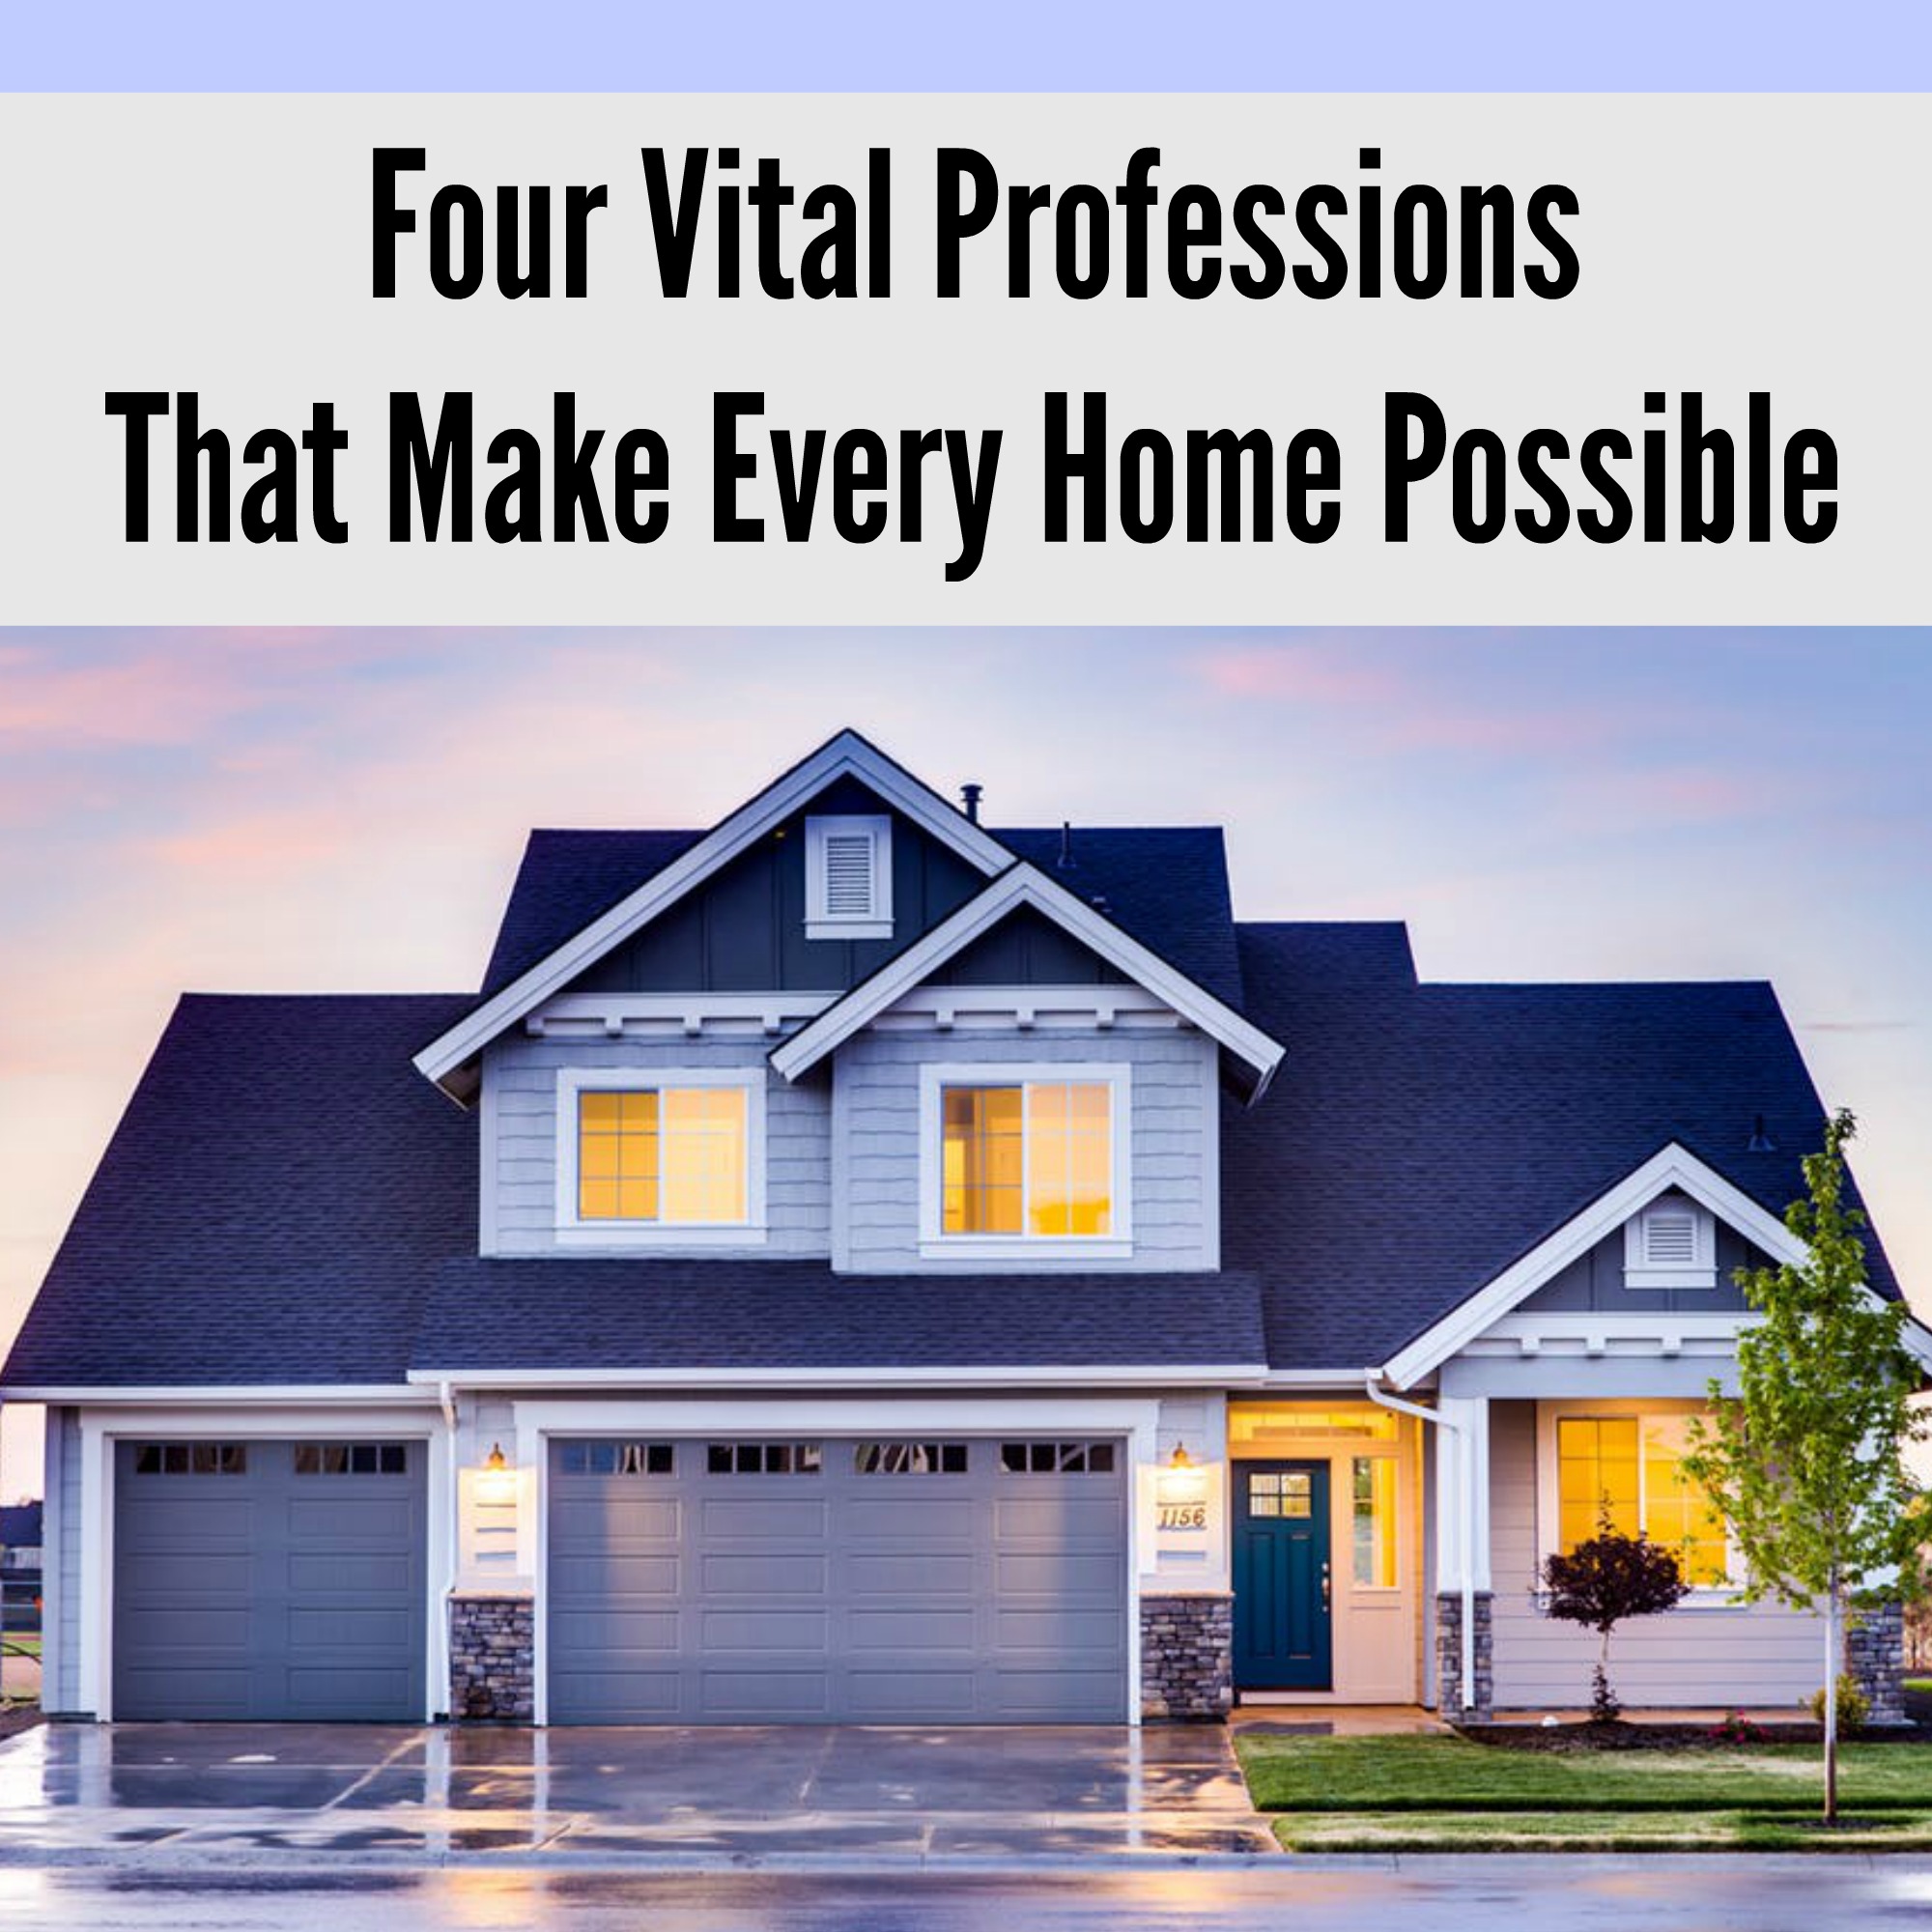 Four Vital Professions That Make Every Home Possible